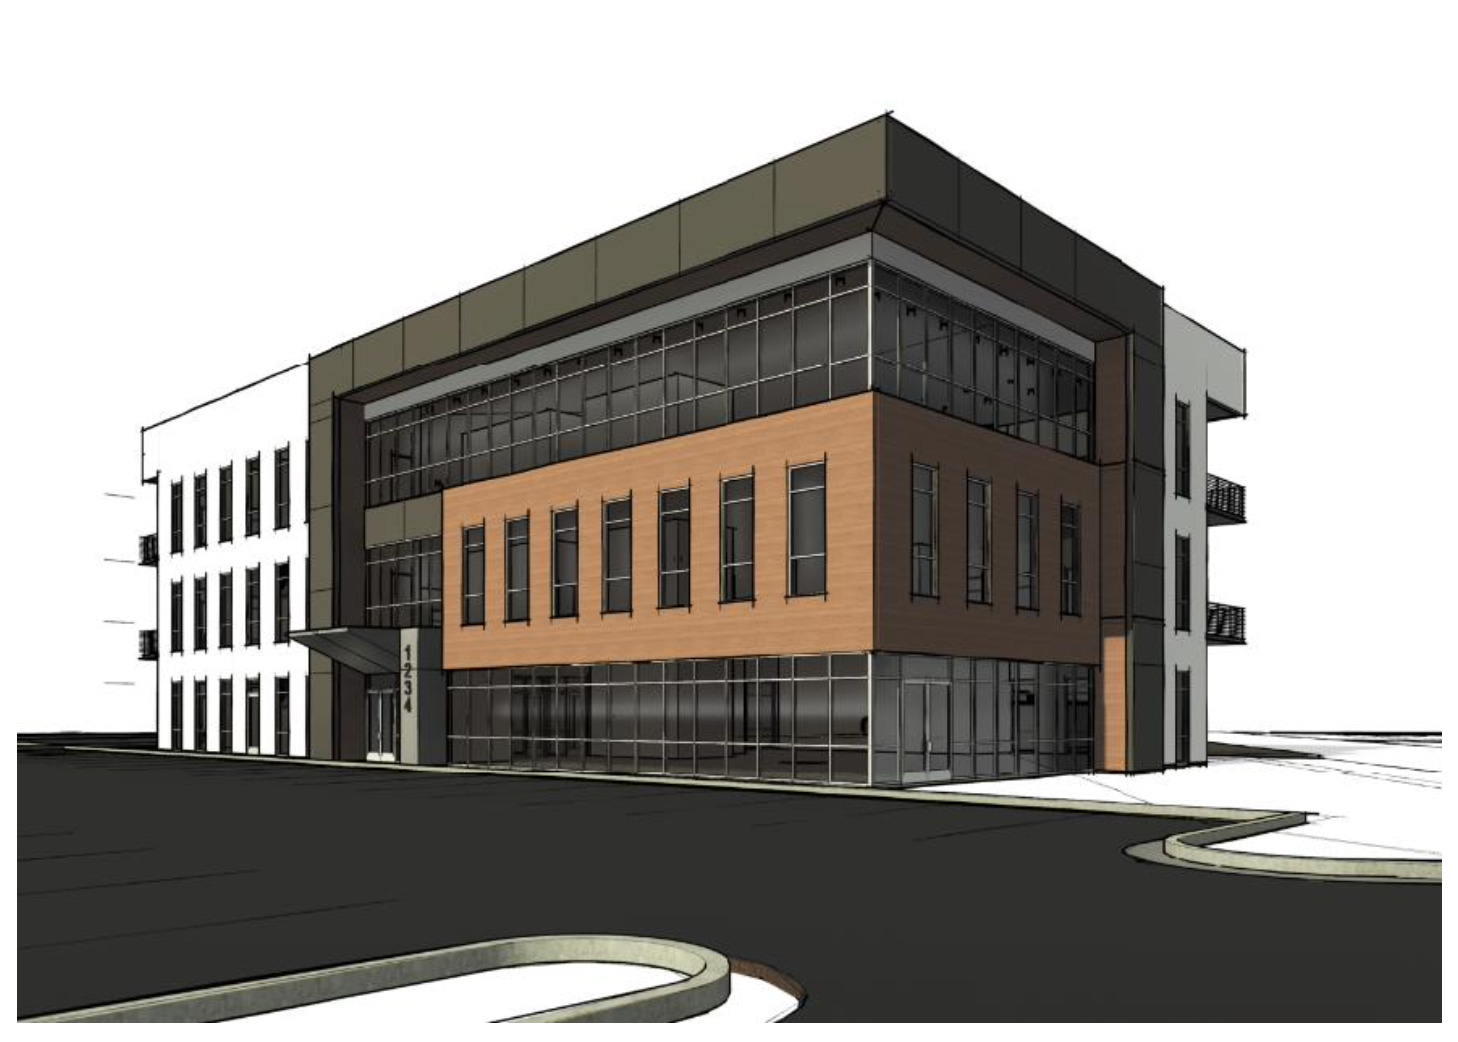 Rendering of the three story office building